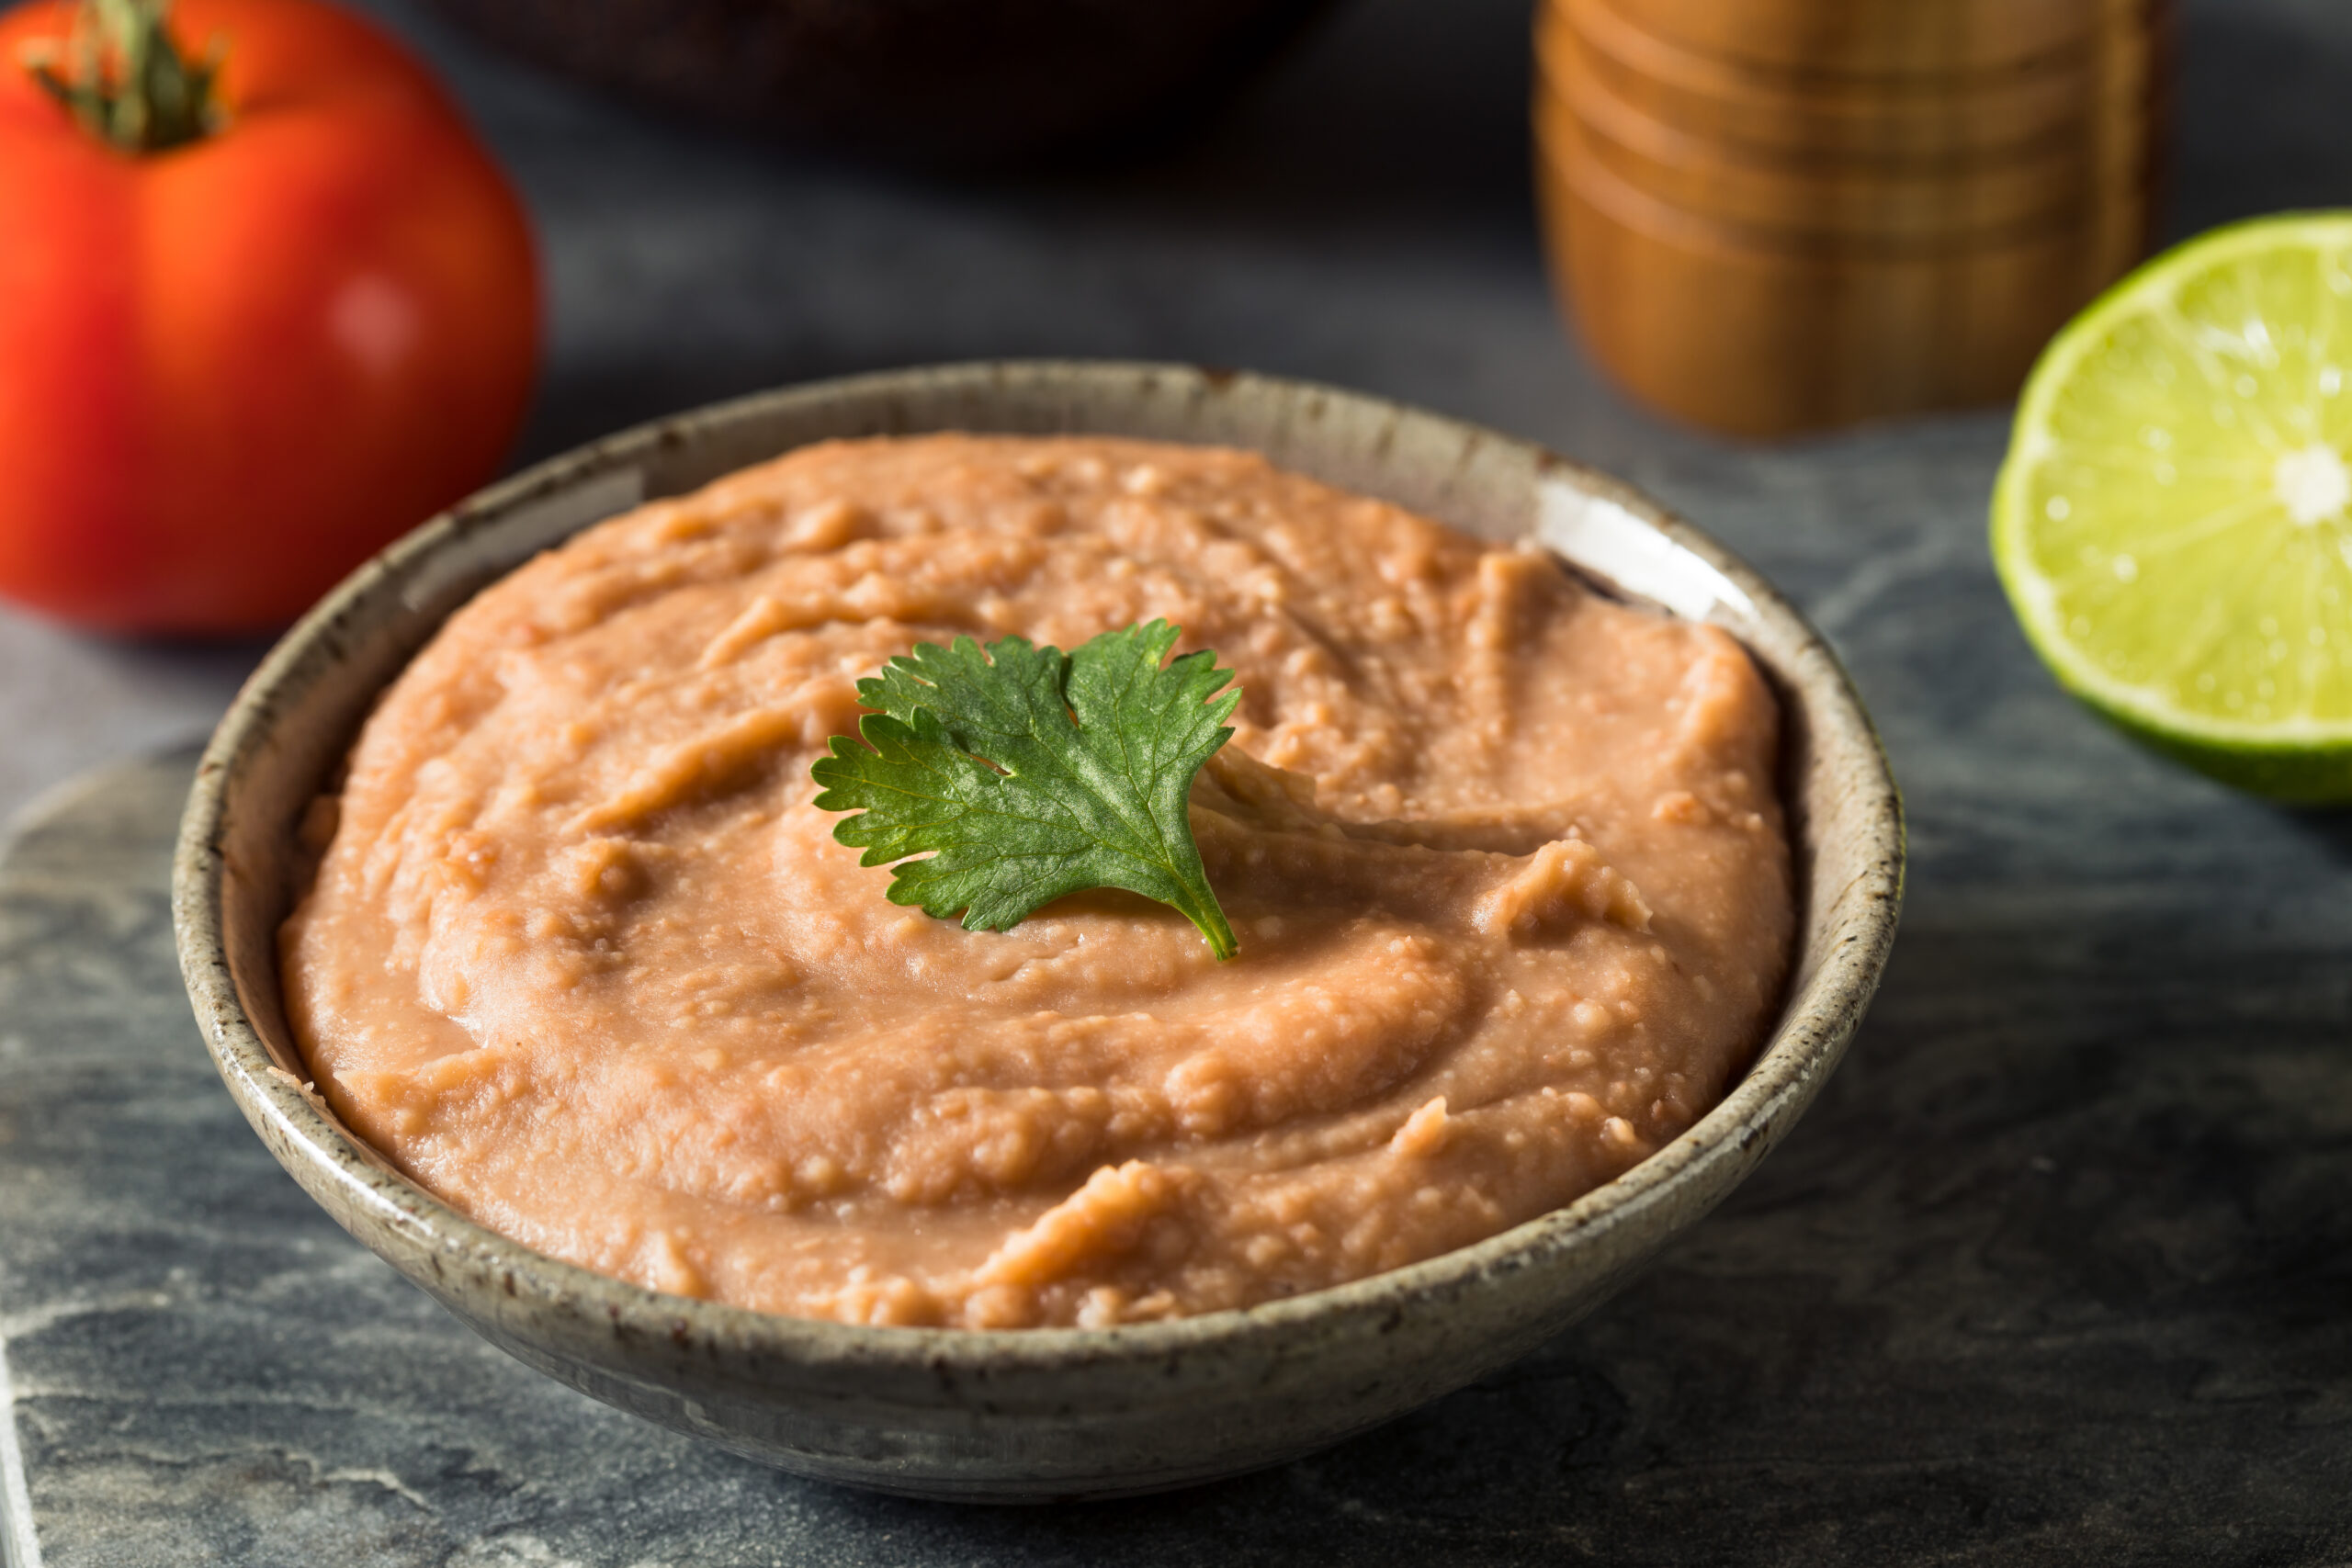 Oil-free Refried Beans